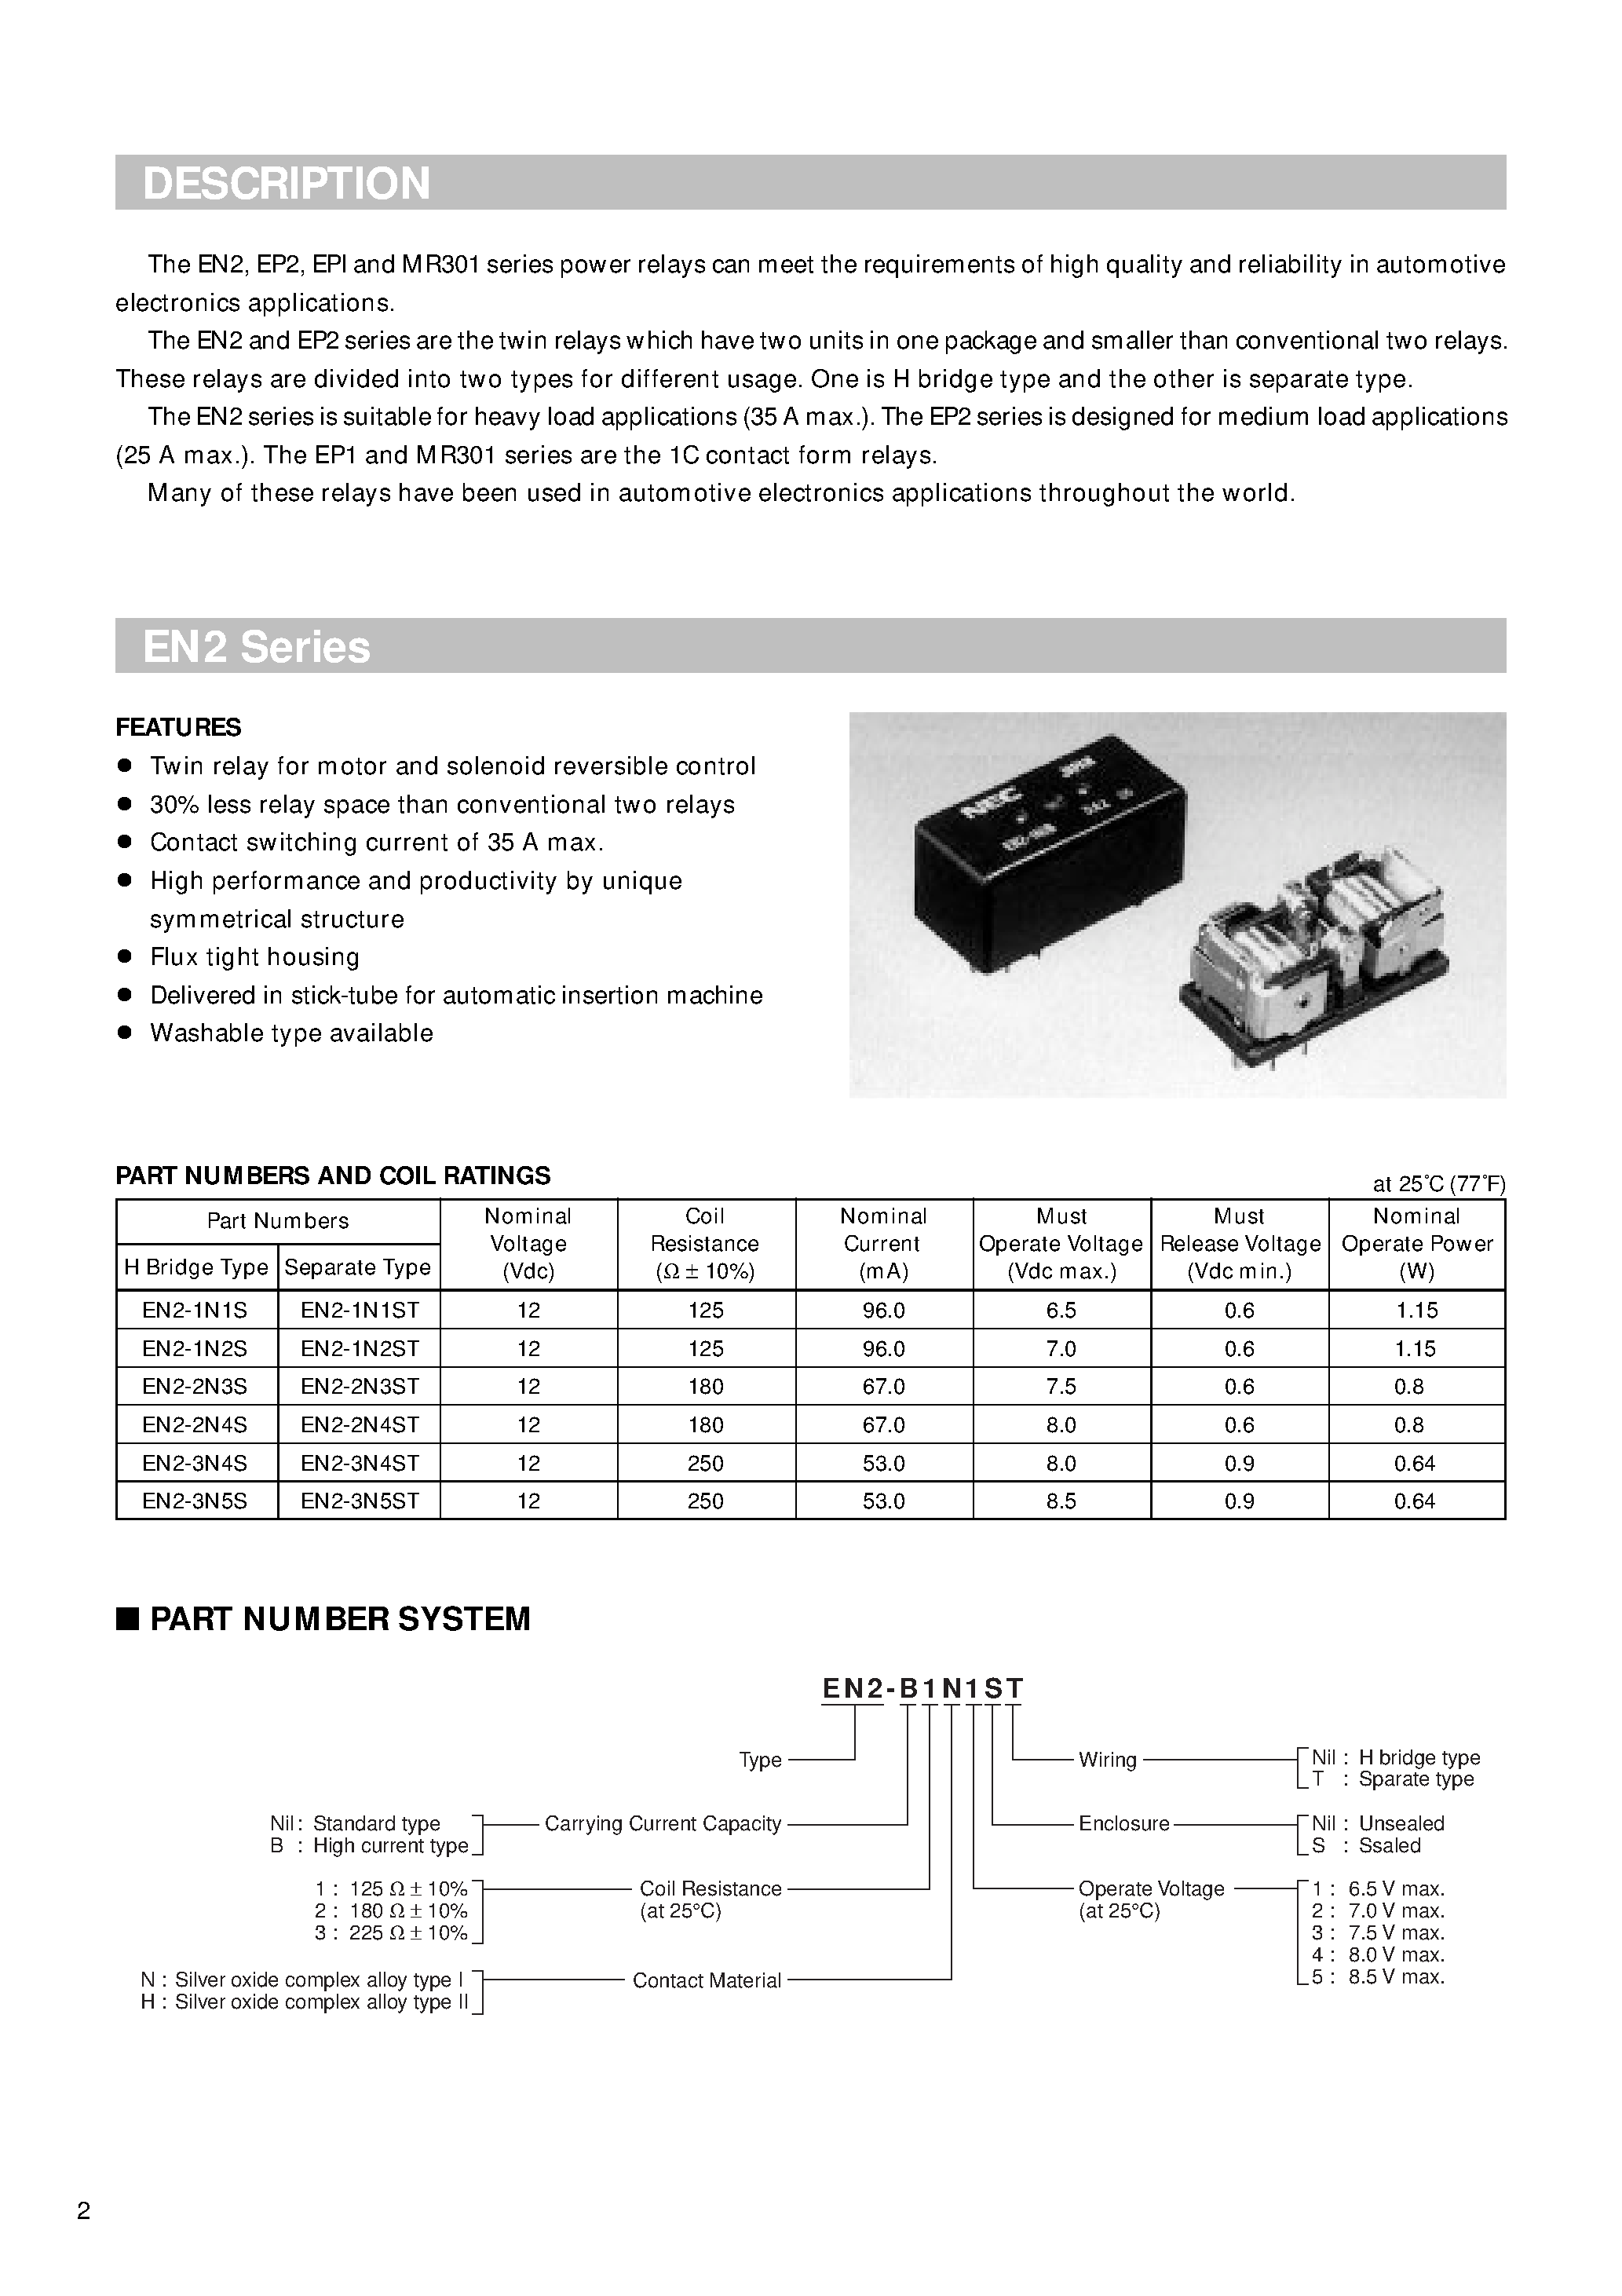 Datasheet EN2-1N3ST - Twin relay for motor and solenoid reversible control page 2